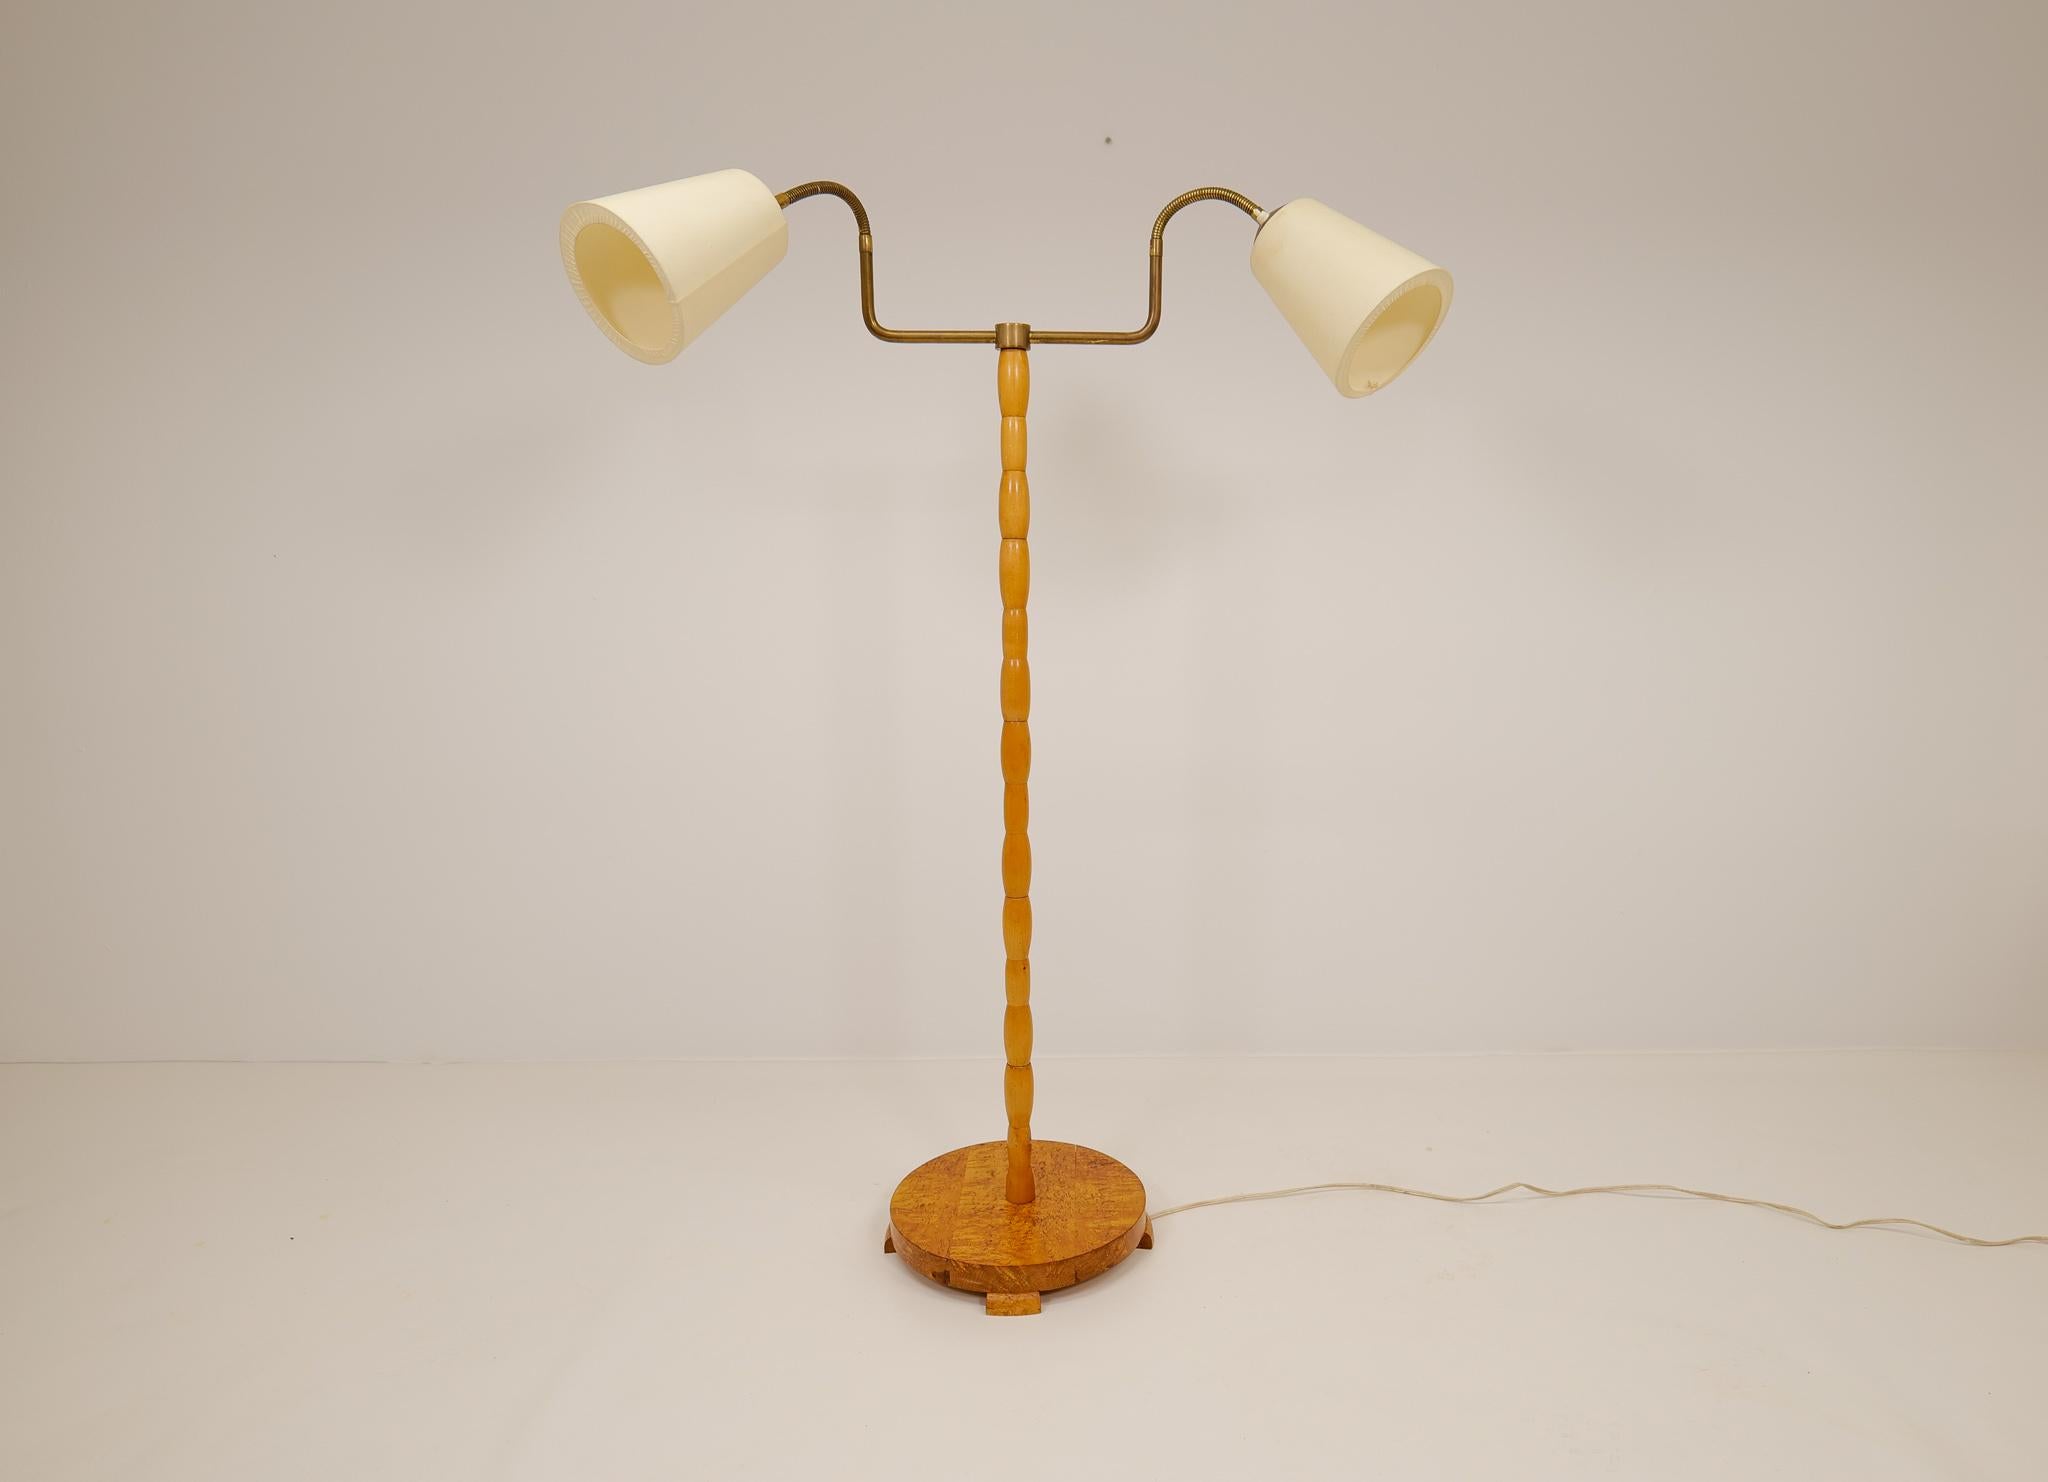 Mid-20th Century Midcentury Organic Floor Lamp in Birch and Brass Sweden, 1950s For Sale